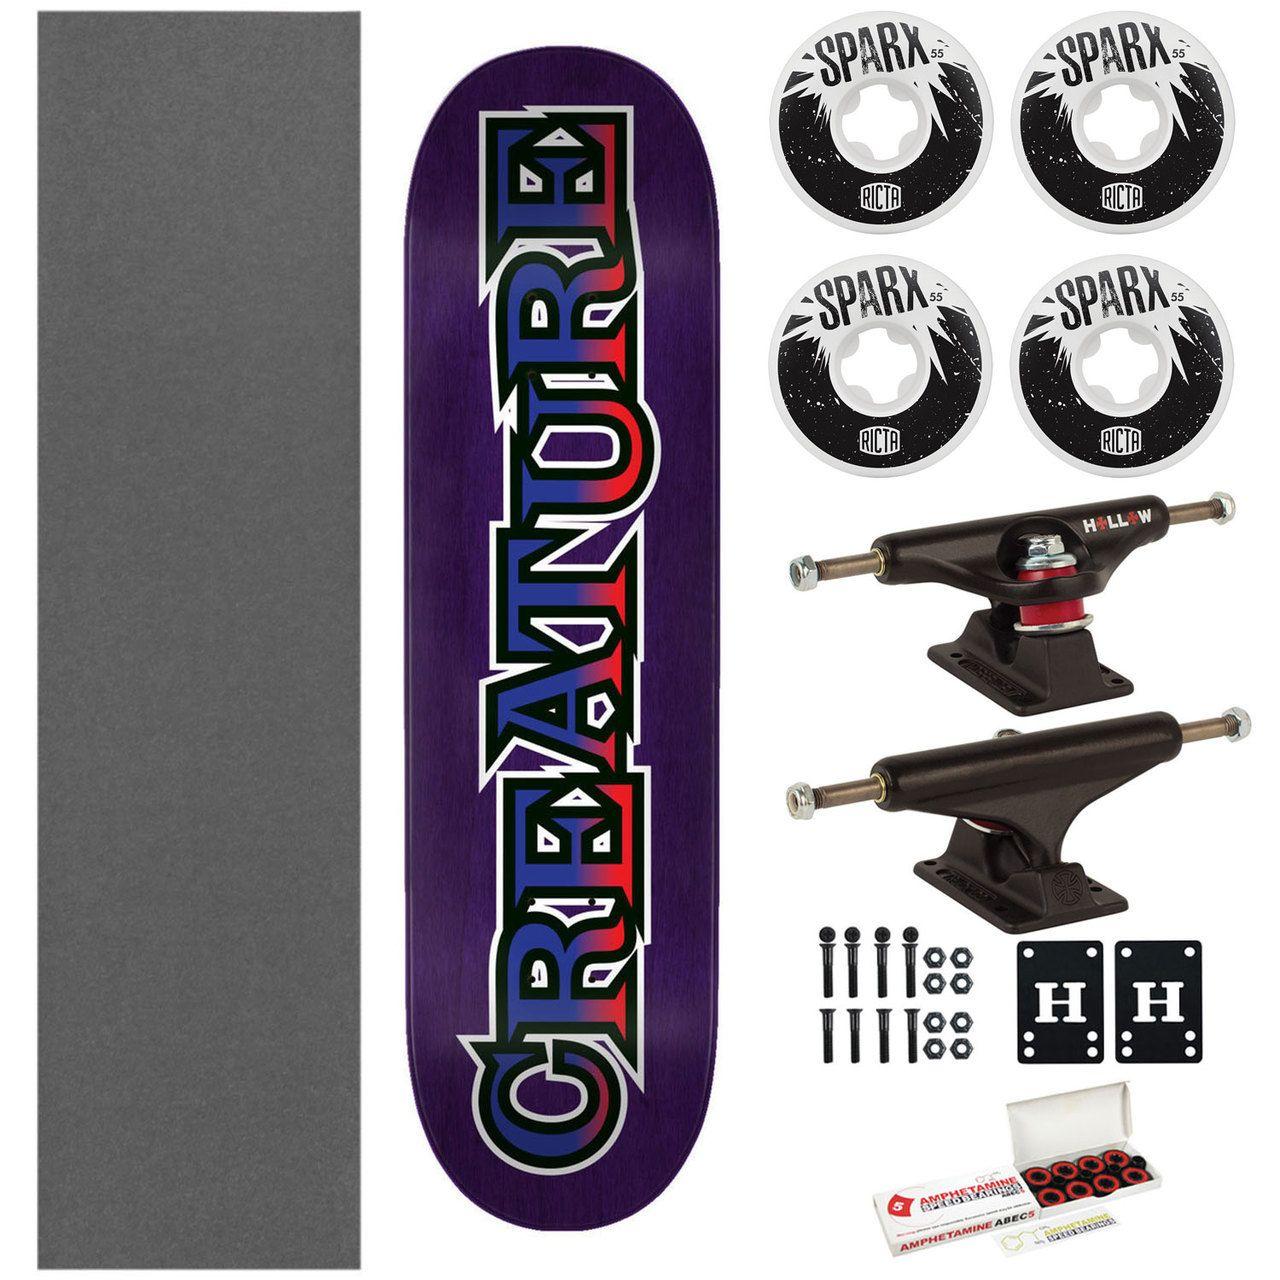 Ricta Logo - Creature Complete Long Logo Sm 8.0 with Independent Trucks, Ricta Wheels